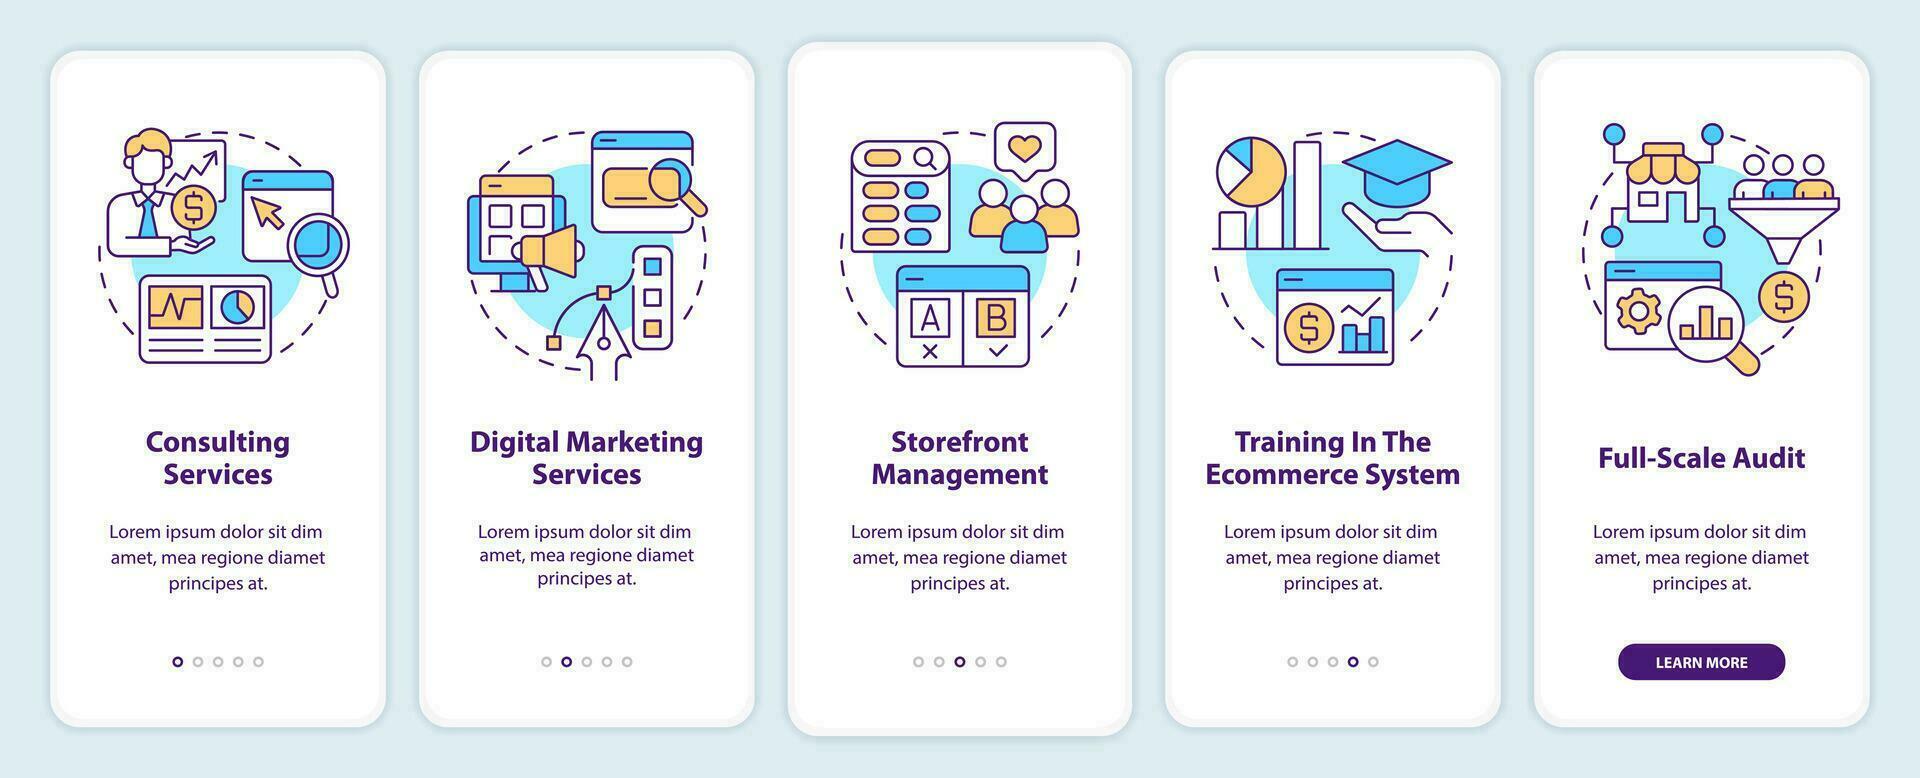 Online shop management services onboarding mobile app screen. Walkthrough 5 steps editable graphic instructions with linear concepts. UI, UX, GUI template vector